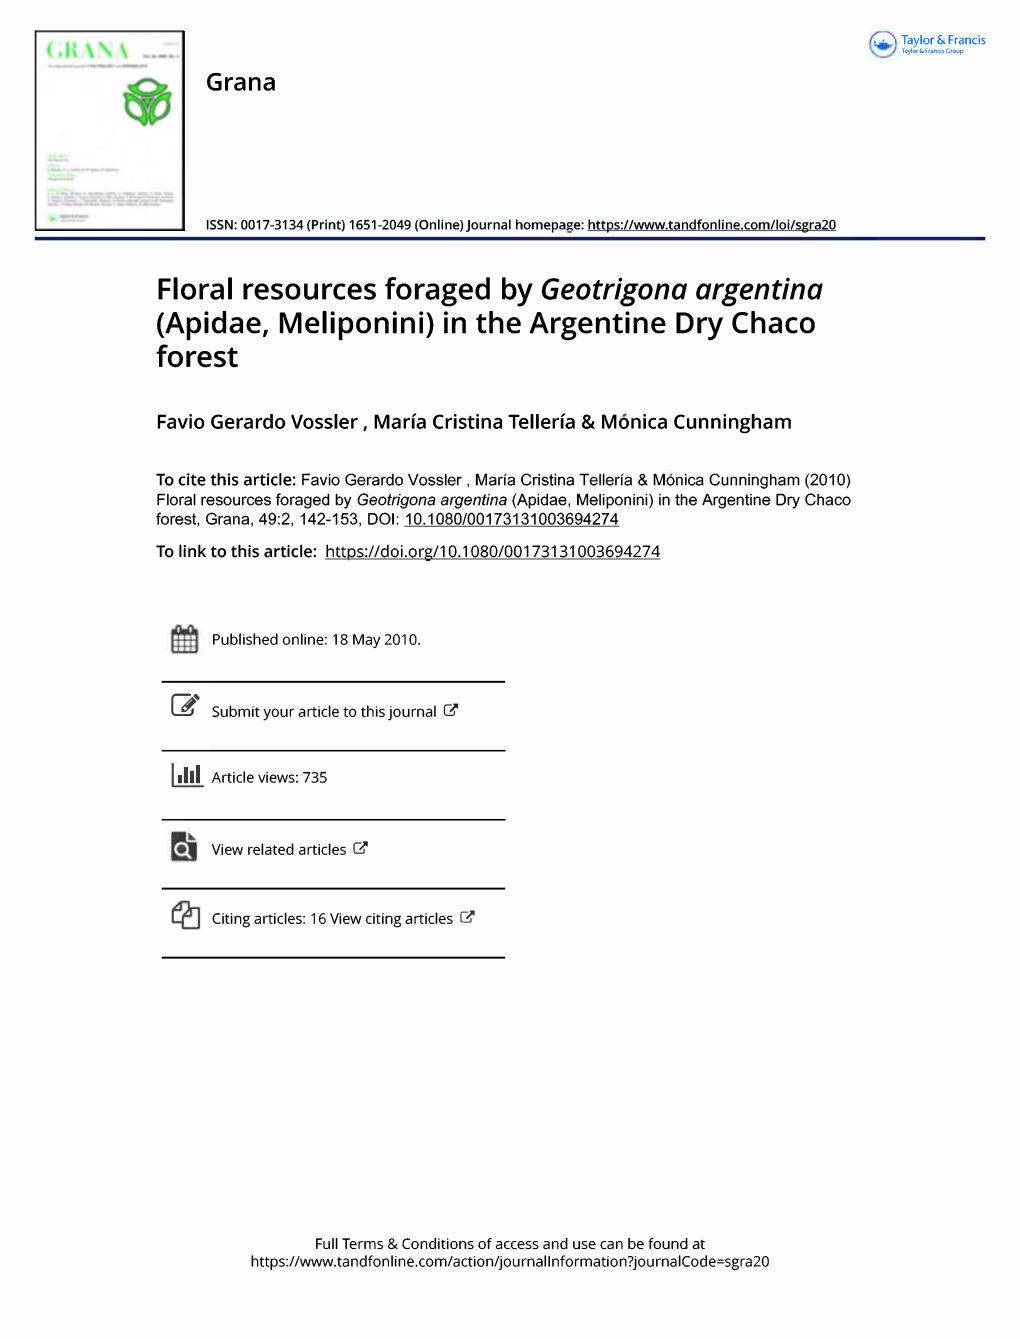 Floral Resources Foraged by Geotrigona Argentina (Apidae, Meliponini) in the Argentine Dry Chaco Forest